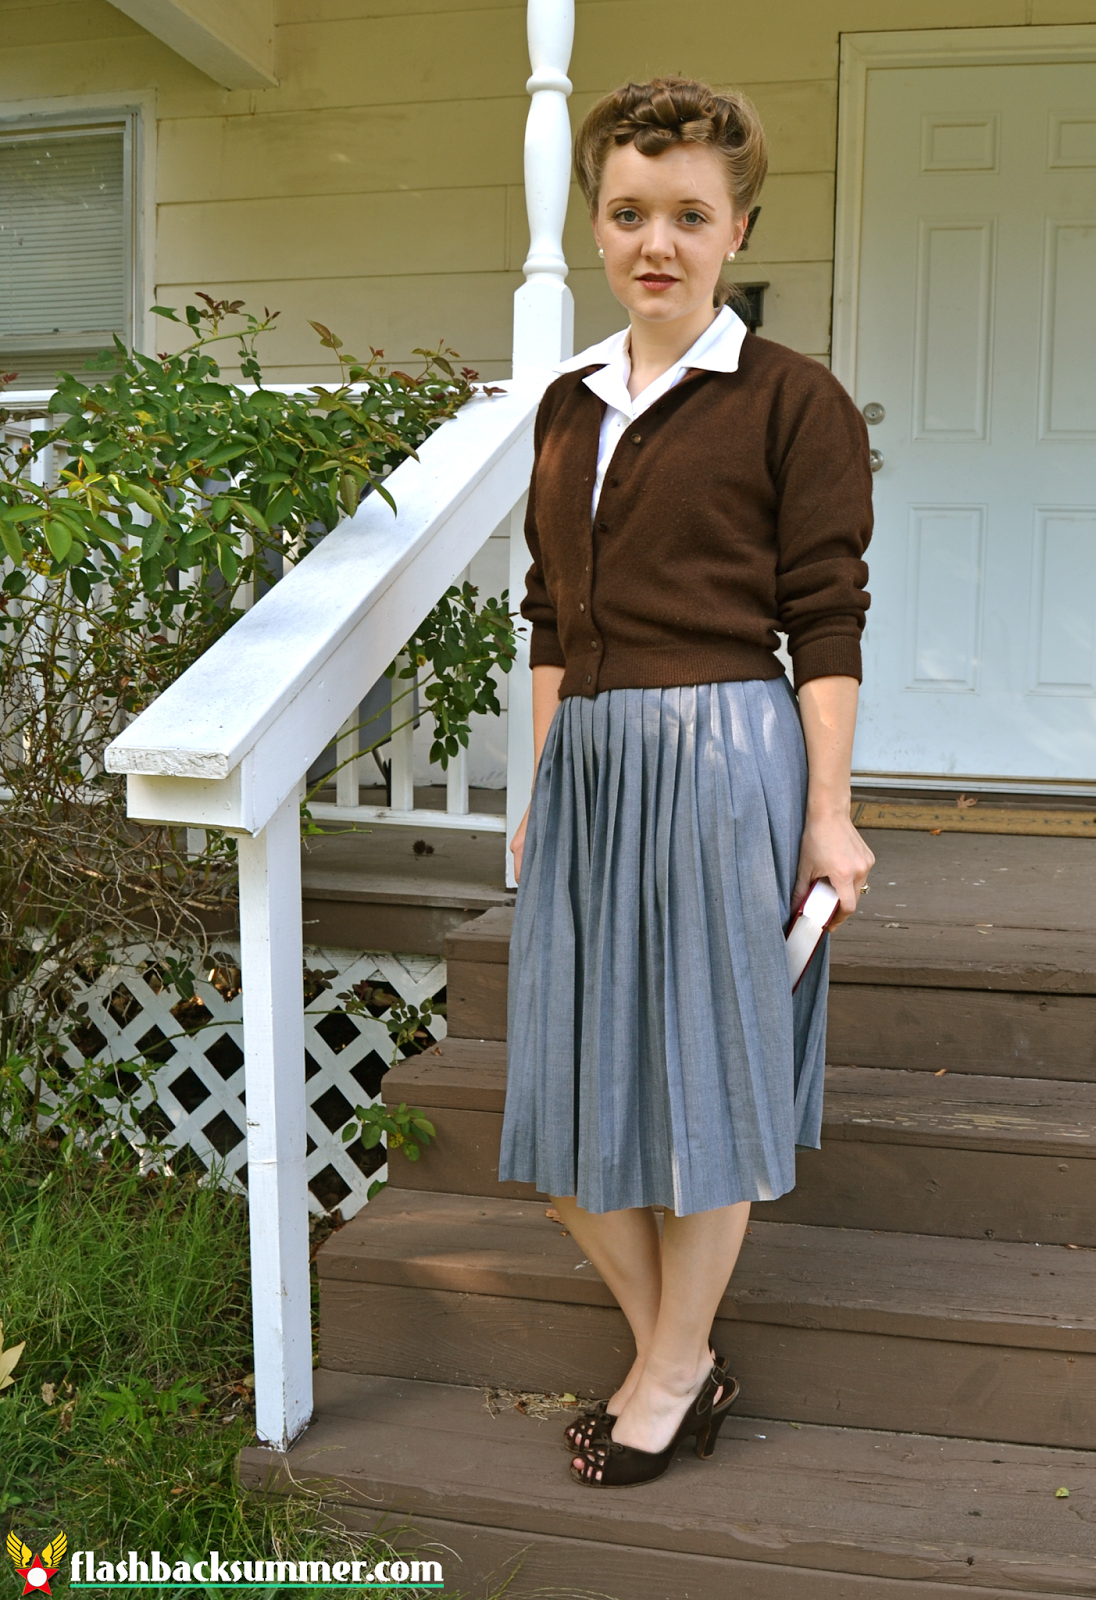 Flashback Summer: Subtle Winterizing and a Sewn-Up 1940s Blouse Pattern - 1940s vintage outfit